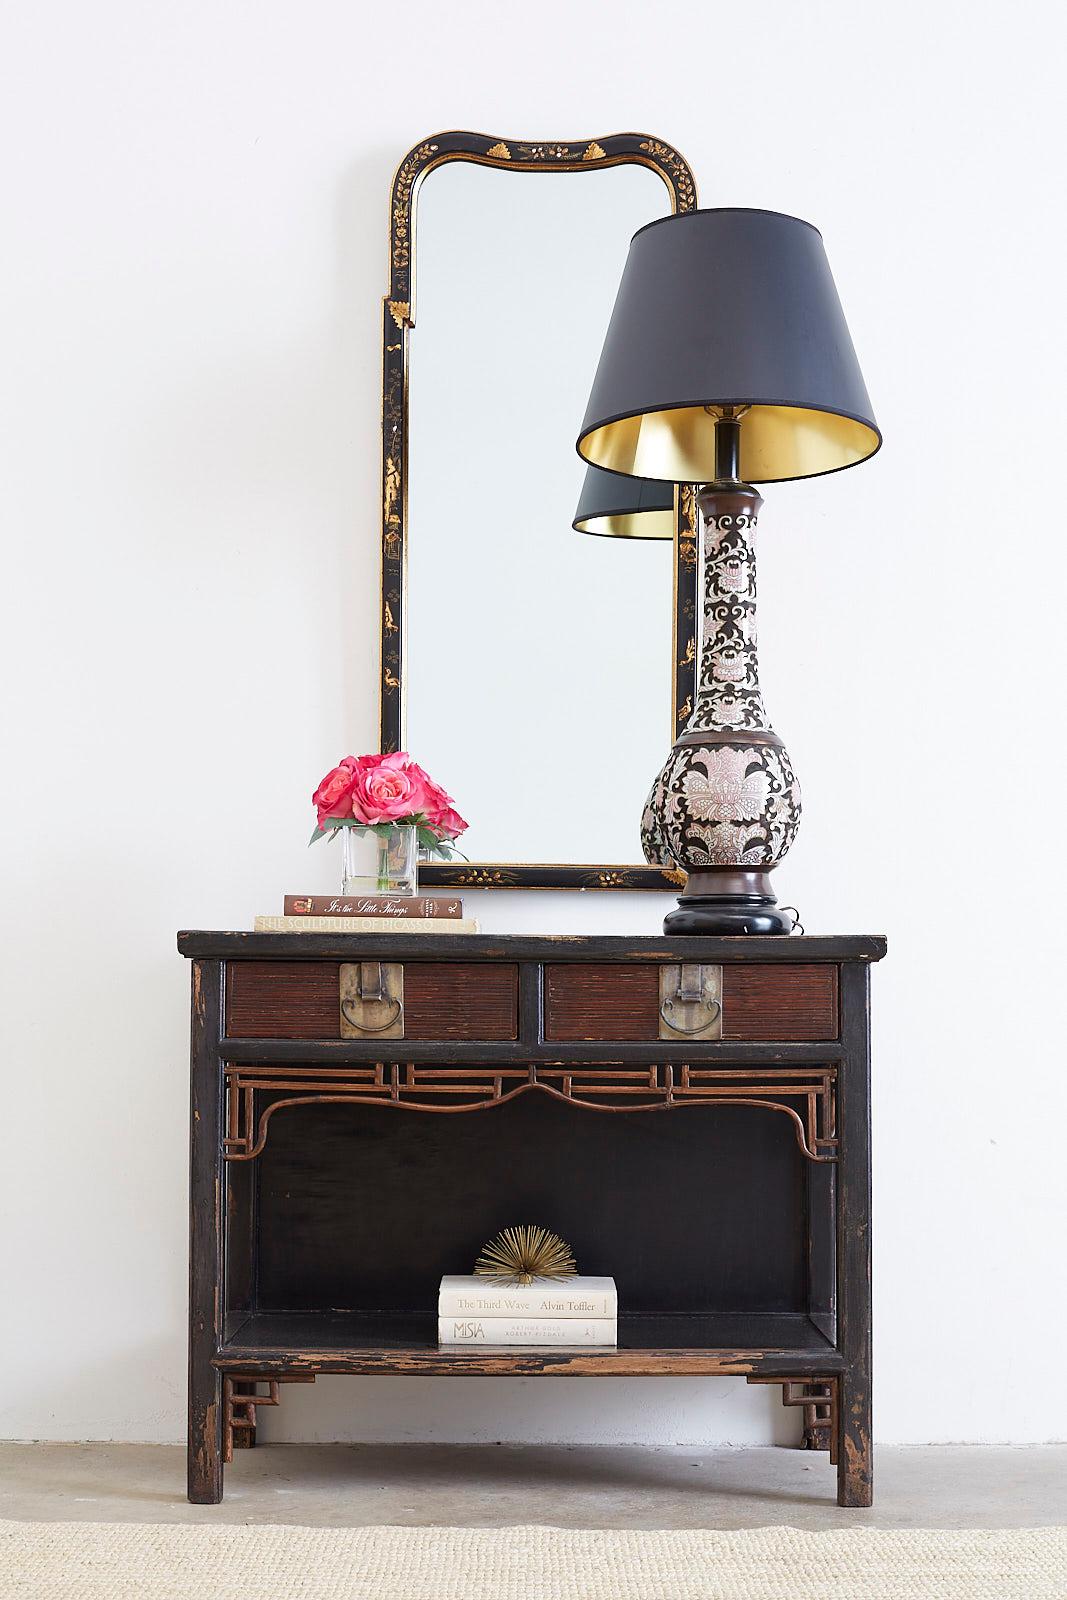 A rare midcentury Chinese cloisonné table lamp made of a long neck bronze vase decorated with a floral foliate pattern in shades of pink over a dark texture diamond pattern background. Sold by Wilshire House of Beverly Hills, CA. No shade included.